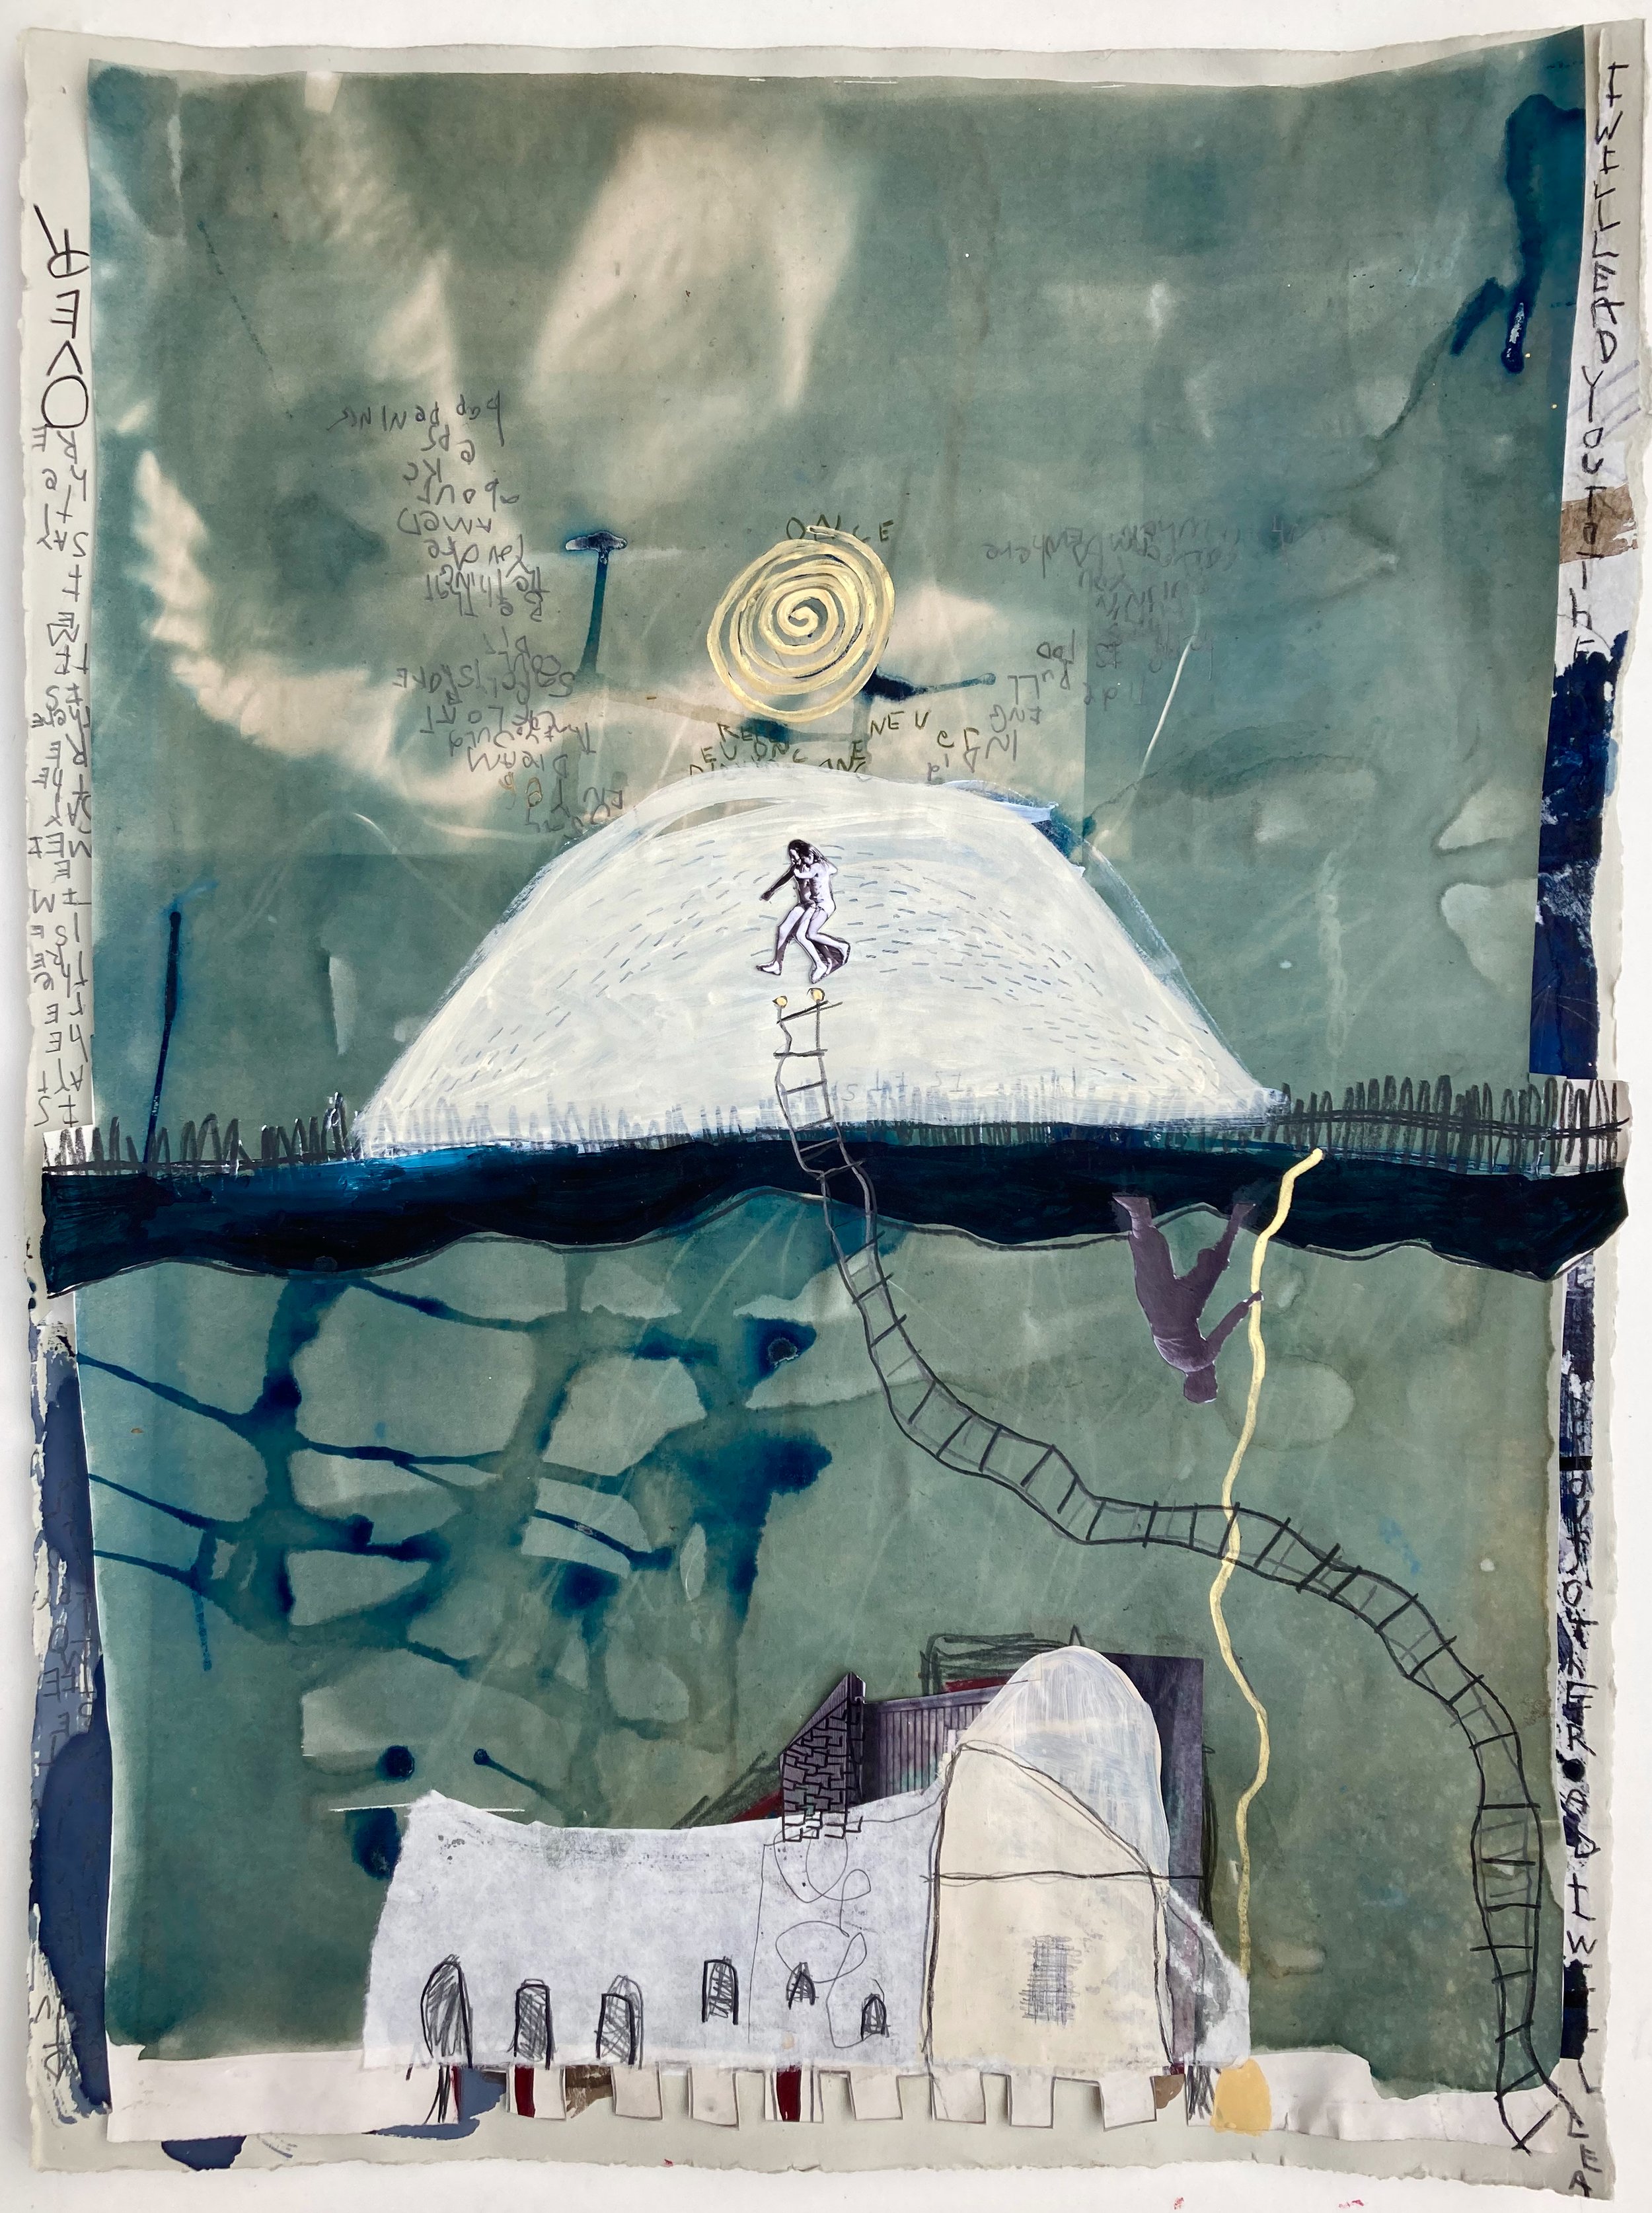 ALL OUR HOPE, 2023. Cyanotype print, gouache, ink, graphite, photo collage on paper. 30 X 22”. Private collection. 